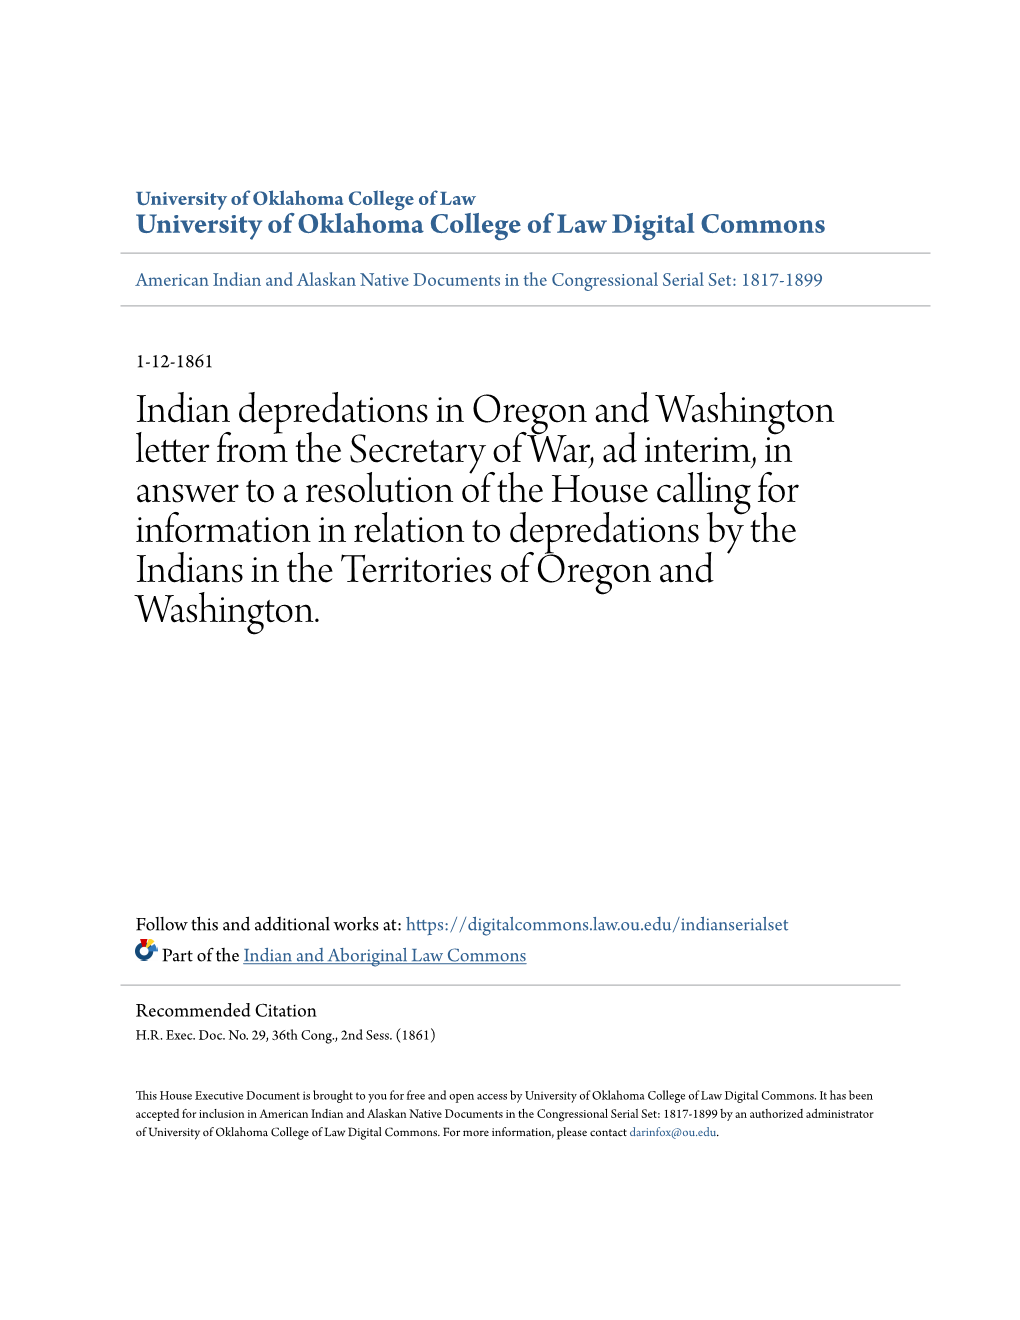 Indian Depredations in Oregon and Washington Letter from The